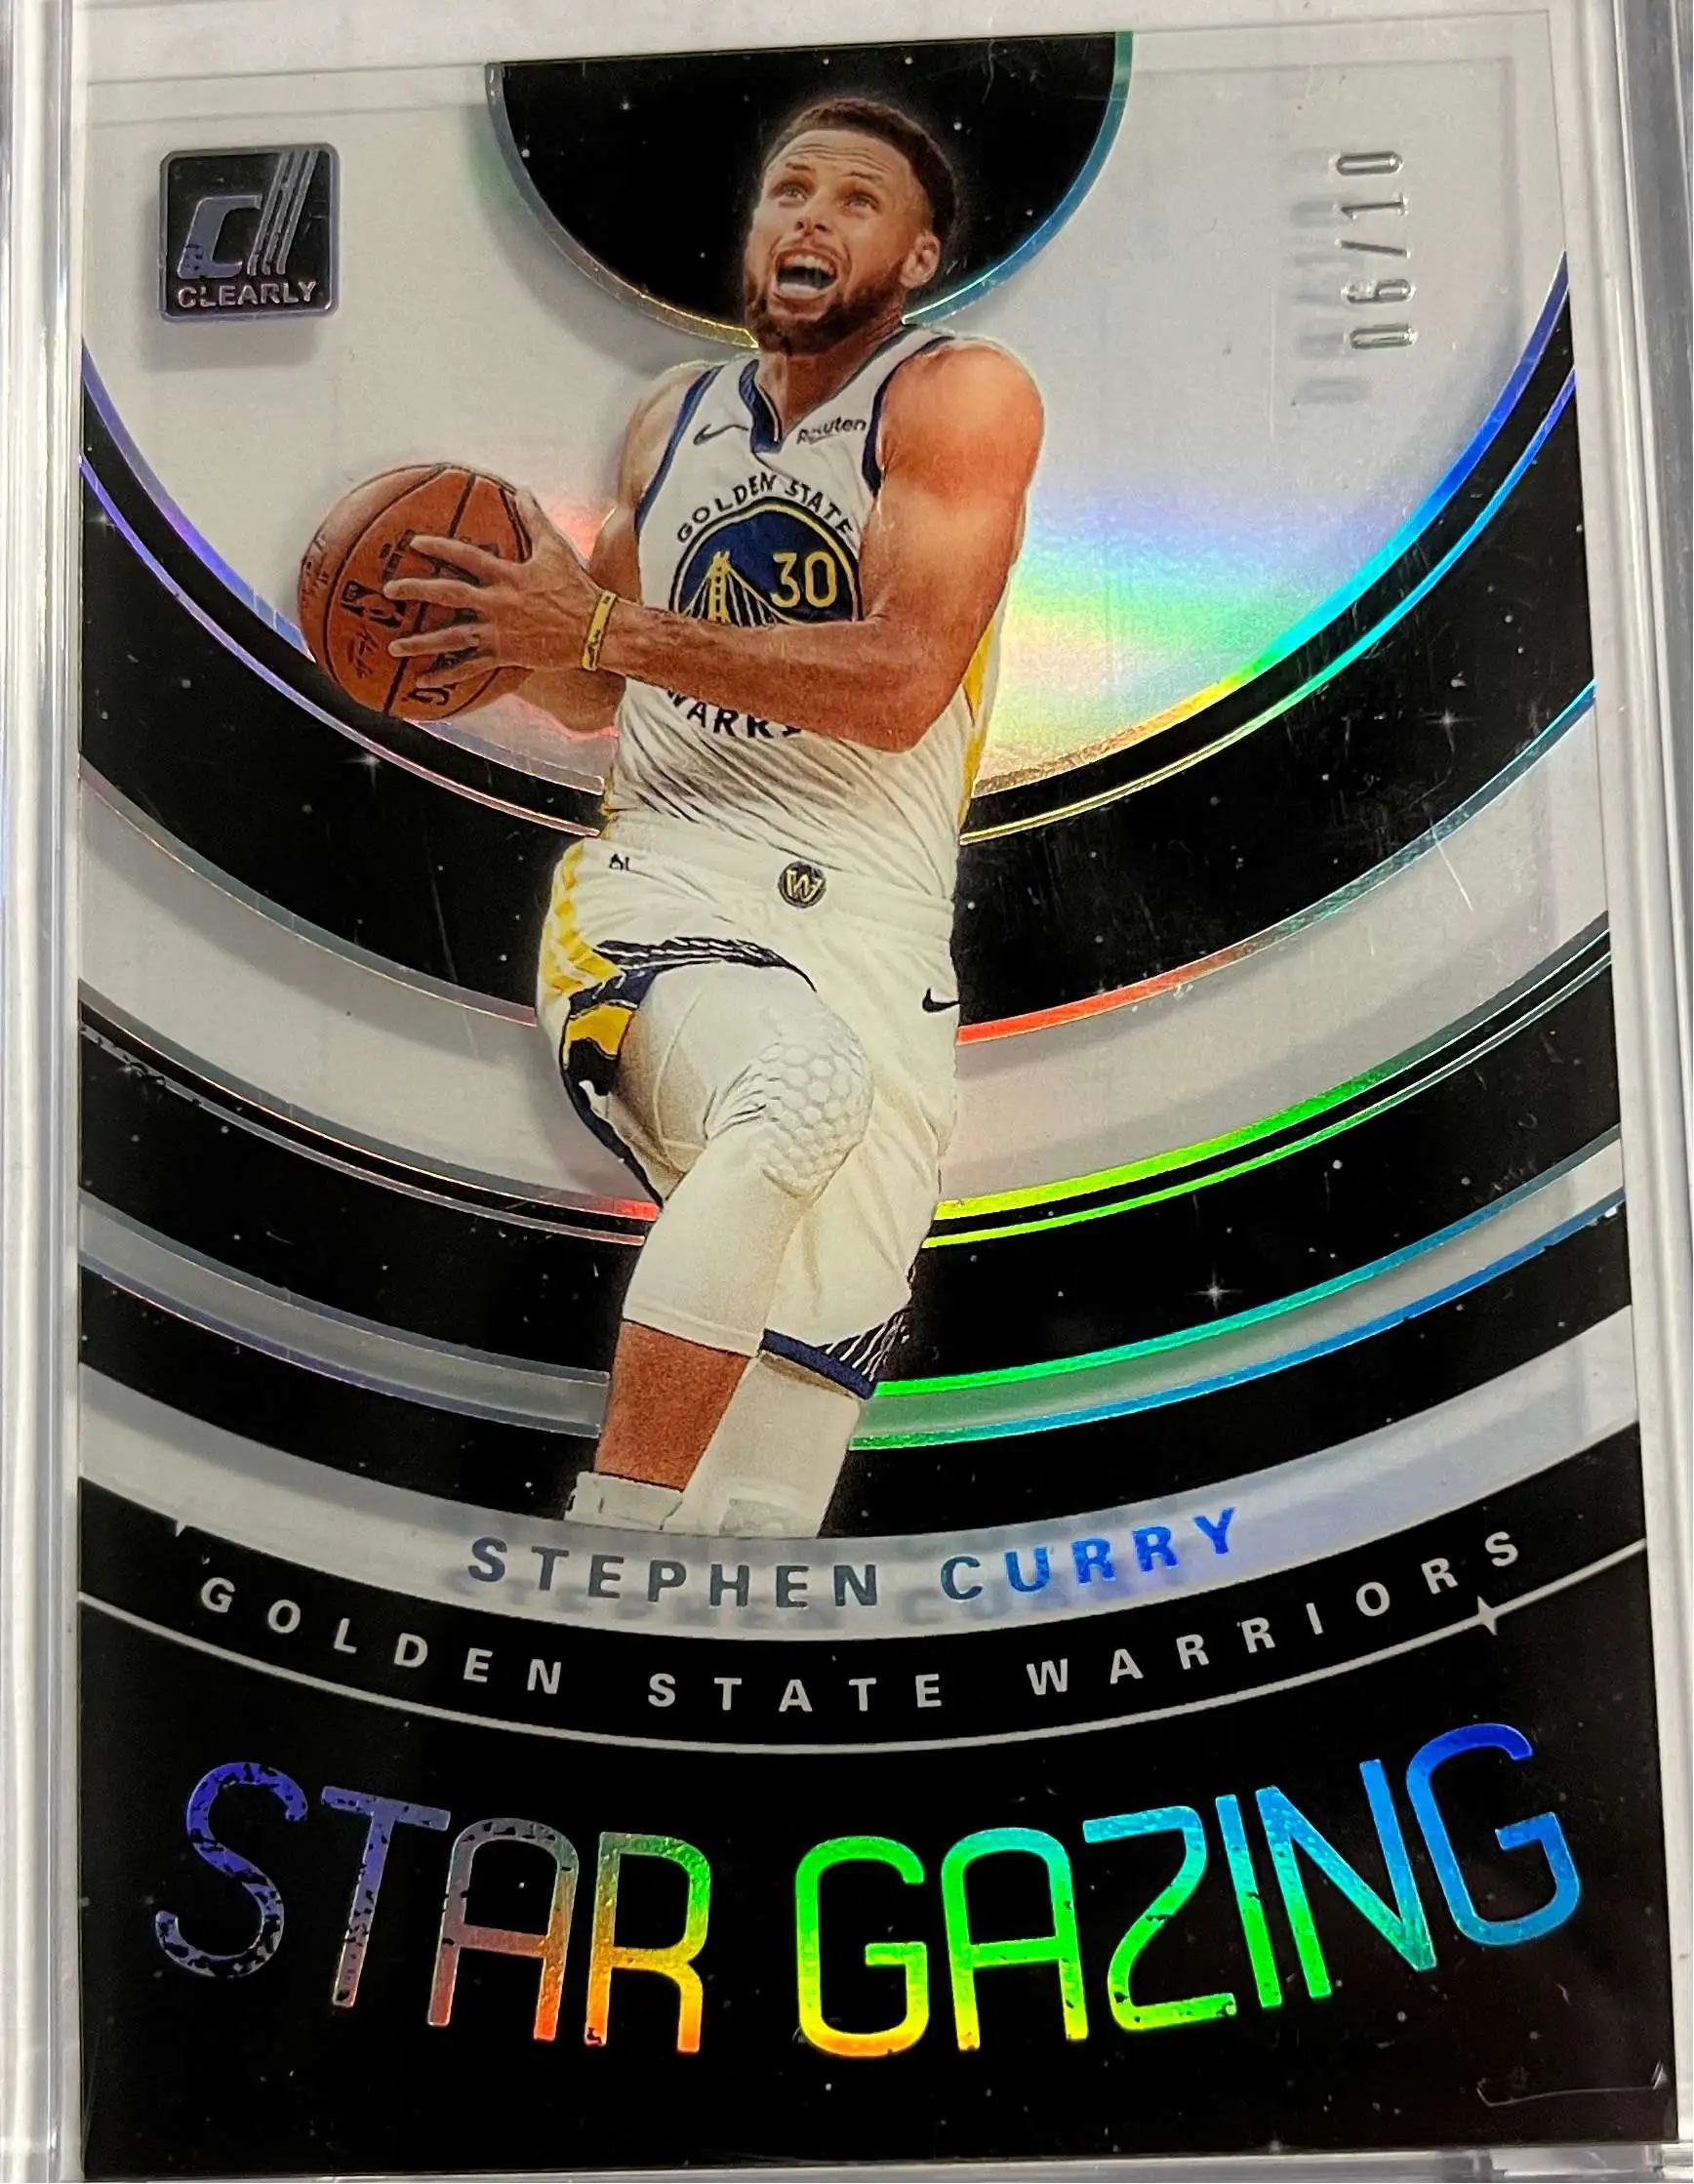 2019 All Star Game Warriors 30 Stephen Curry Black Gold Basketball